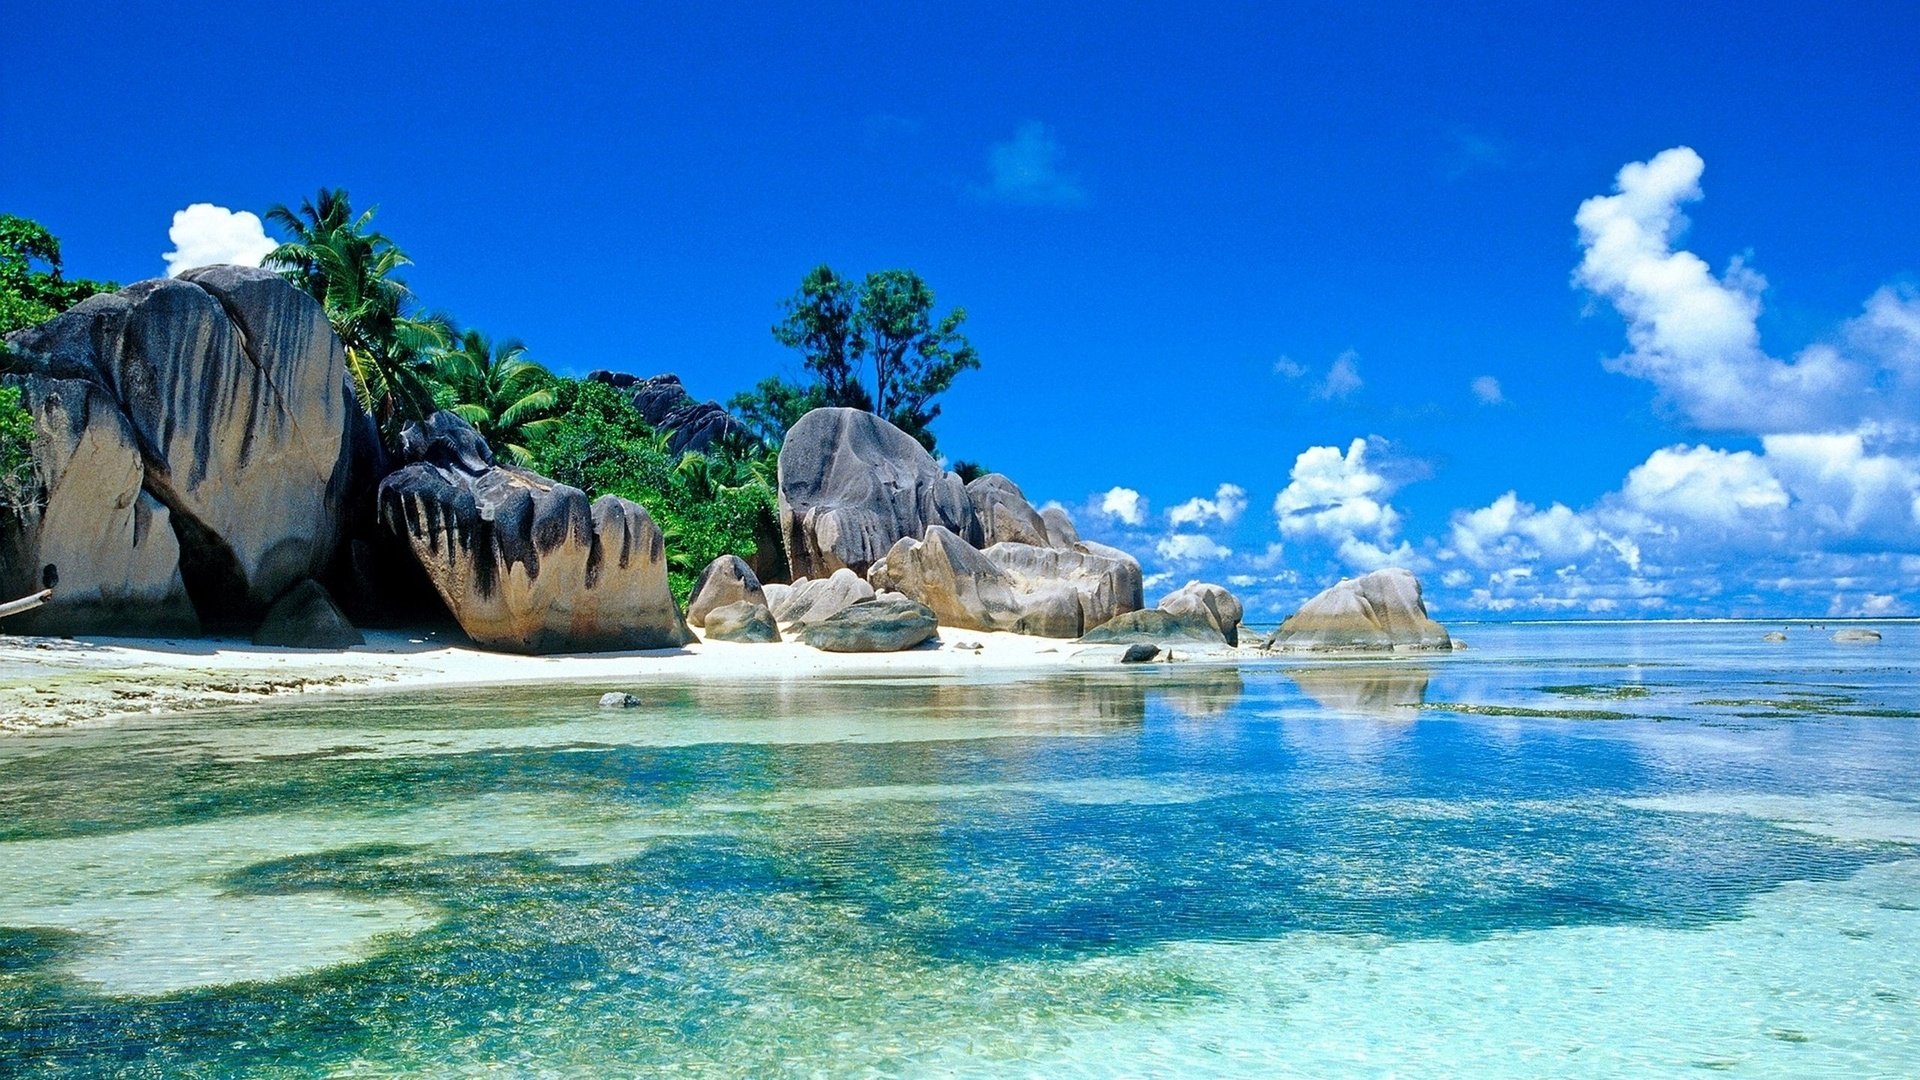 Free Beach Screensavers And Wallpapers Tropical Beach With Large Rocks 1920x1080